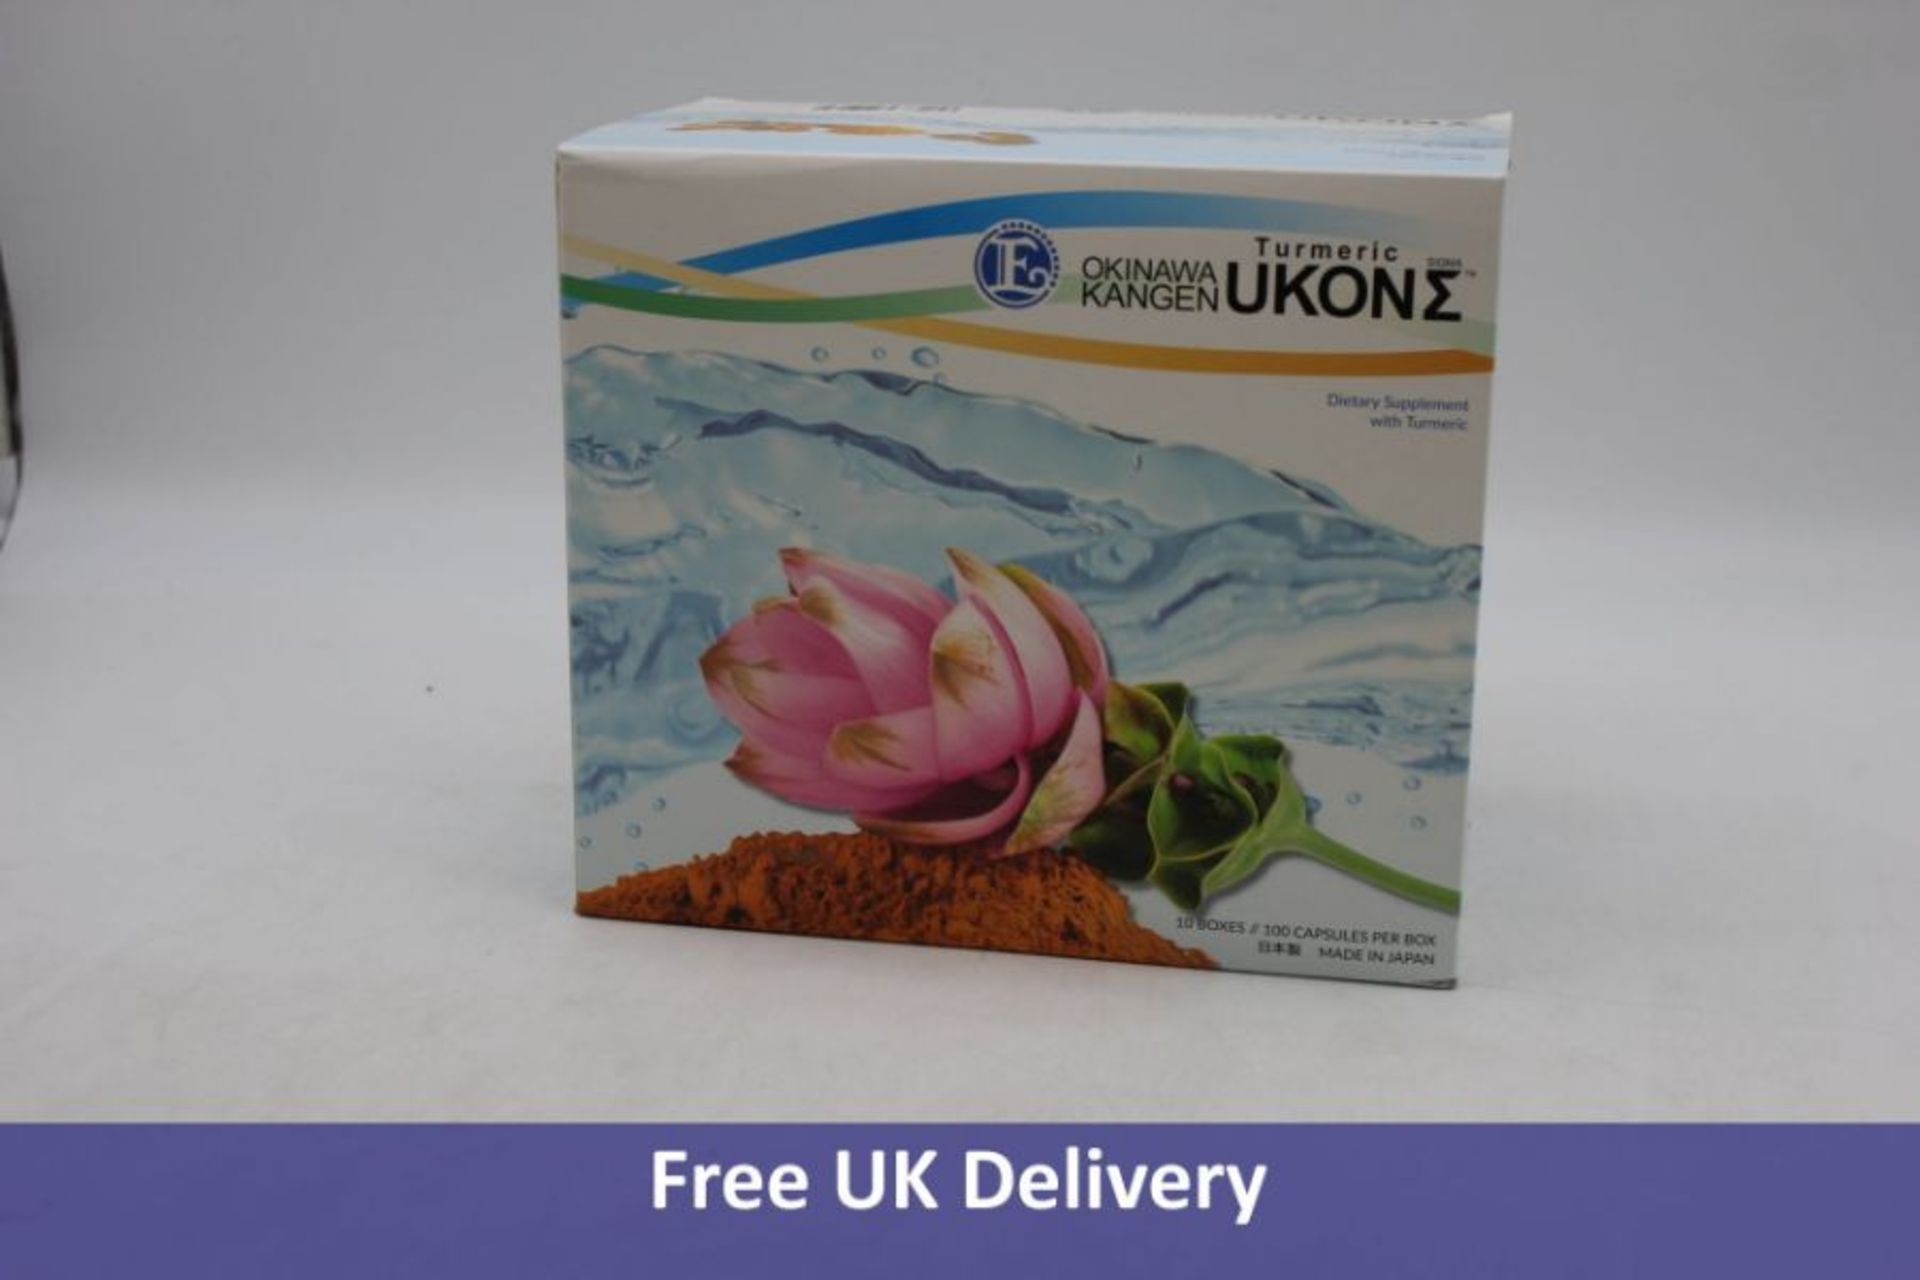 Box of Turmeric Okinawa Kangen Ukone Capsules, Contains 10 Boxes of 100 Capsules, 1000 Capsules In T